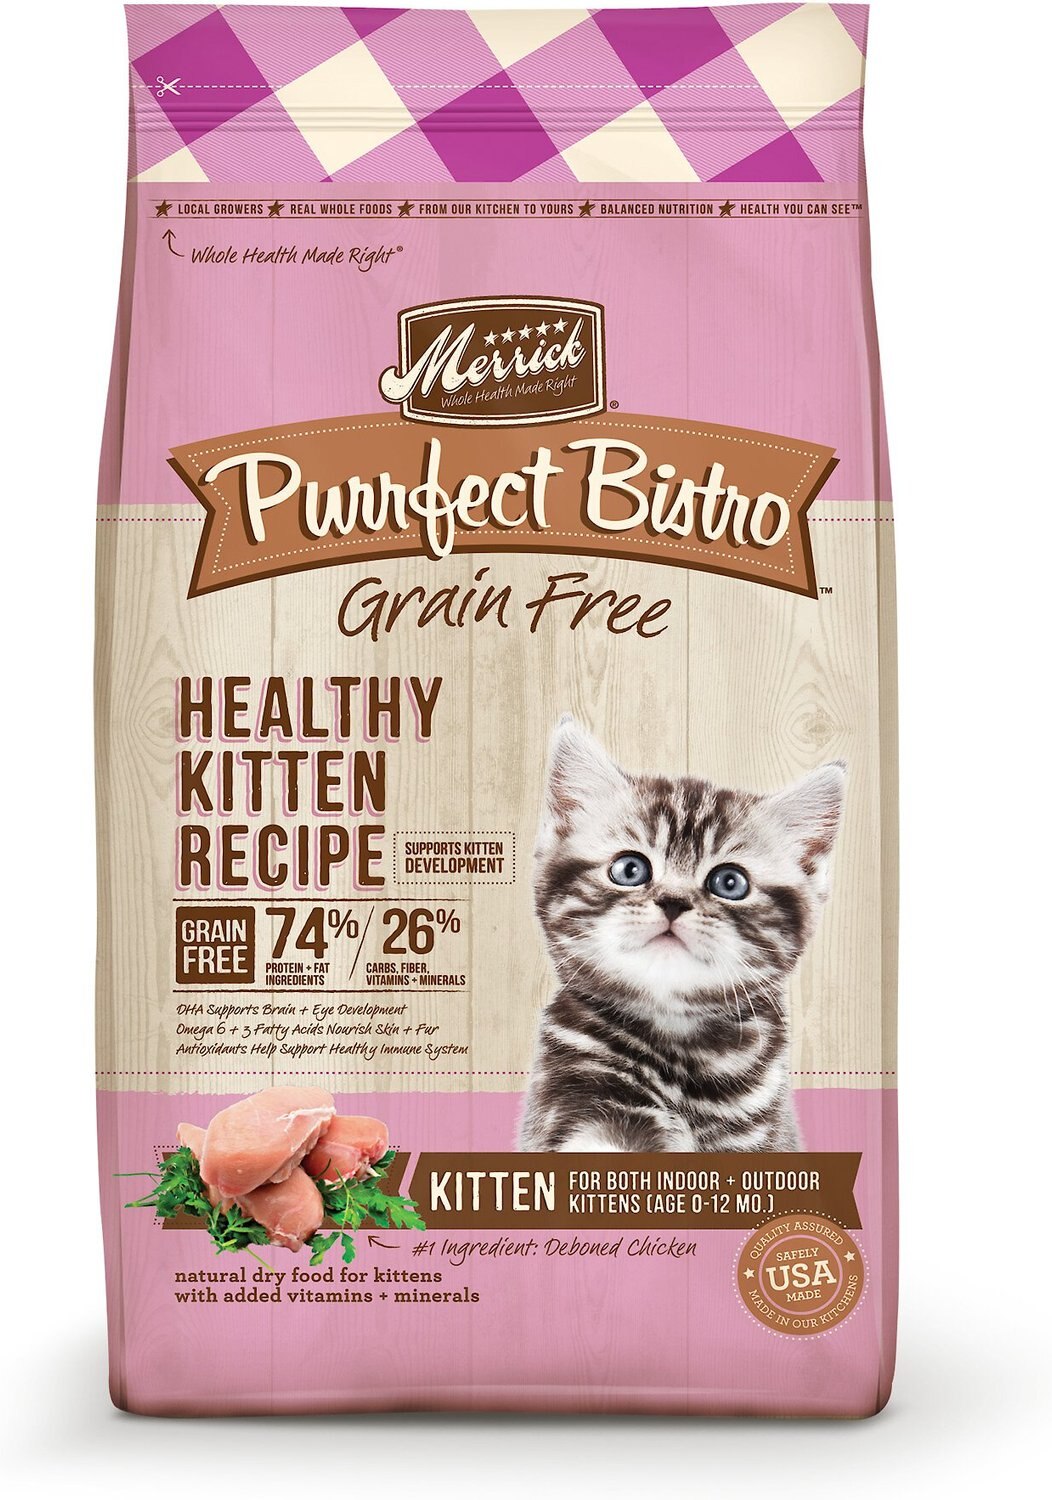 grain free food for cats